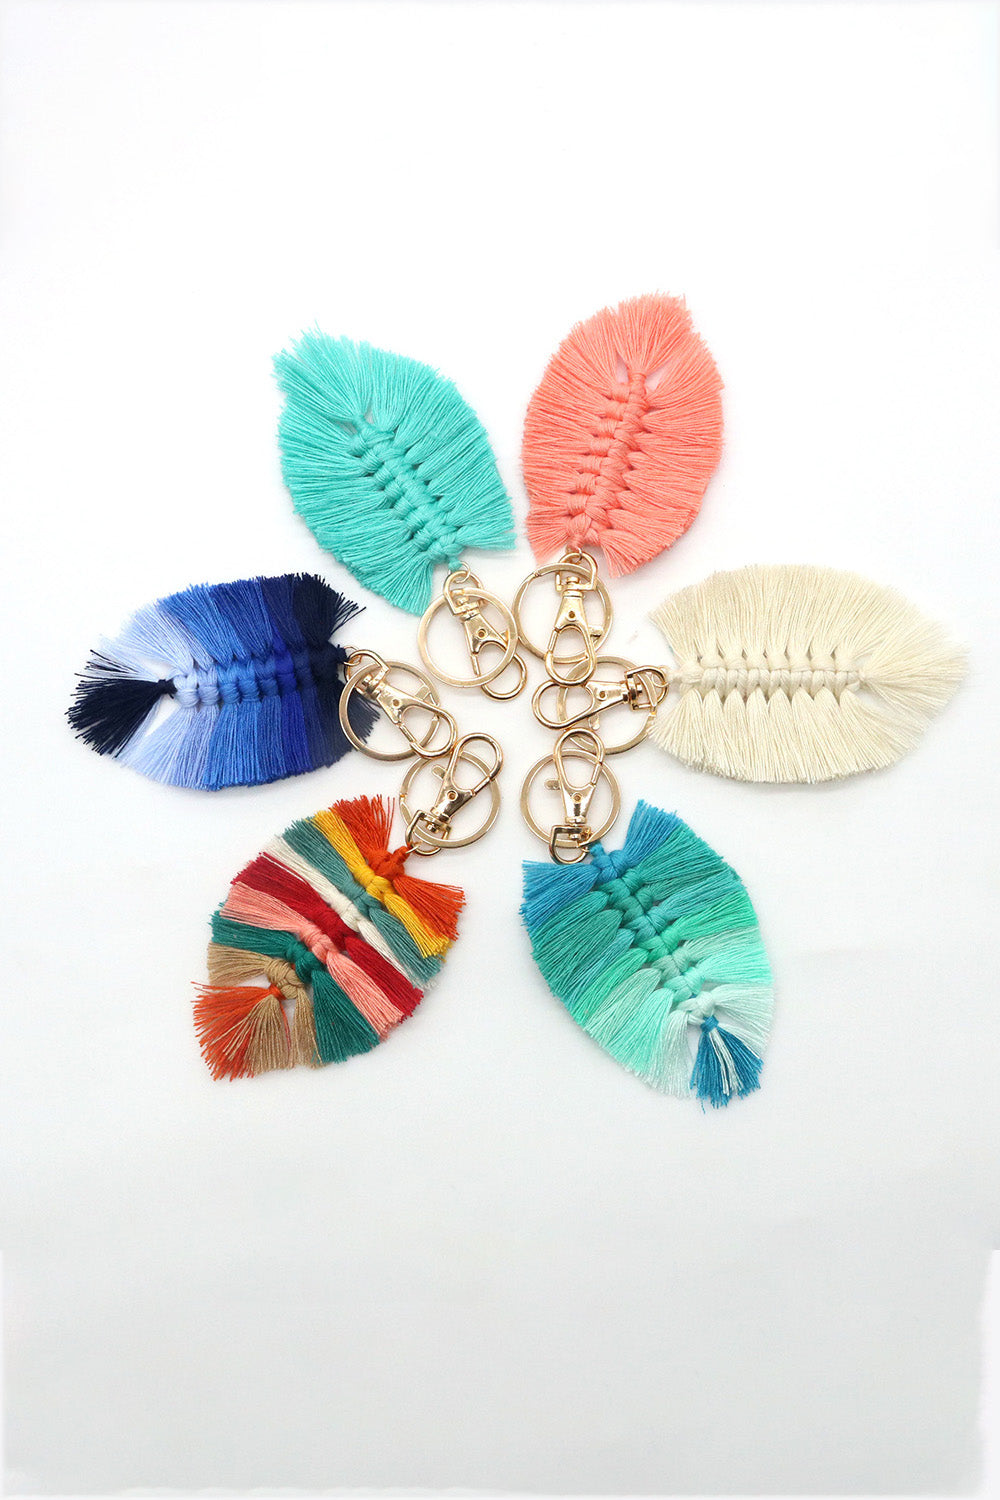 Trendsi Cupid Beauty Supplies Keychains Assorted 4-Pack Leaf Shape Fringe Keychain